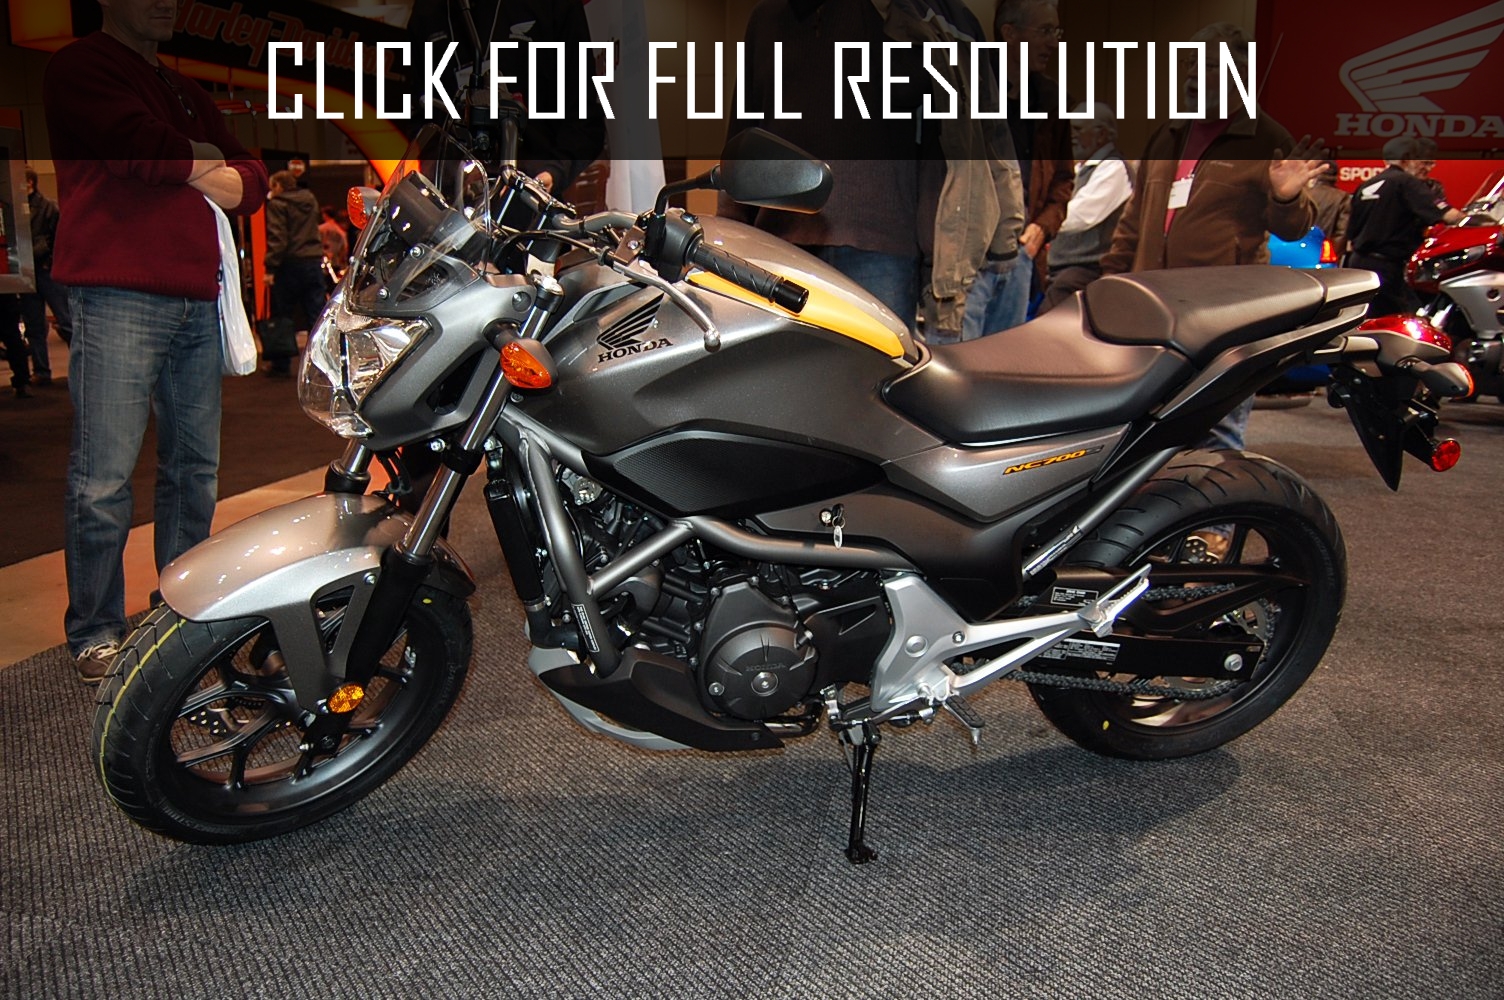 2011 Honda Nc700x - news, reviews, msrp, ratings with amazing images